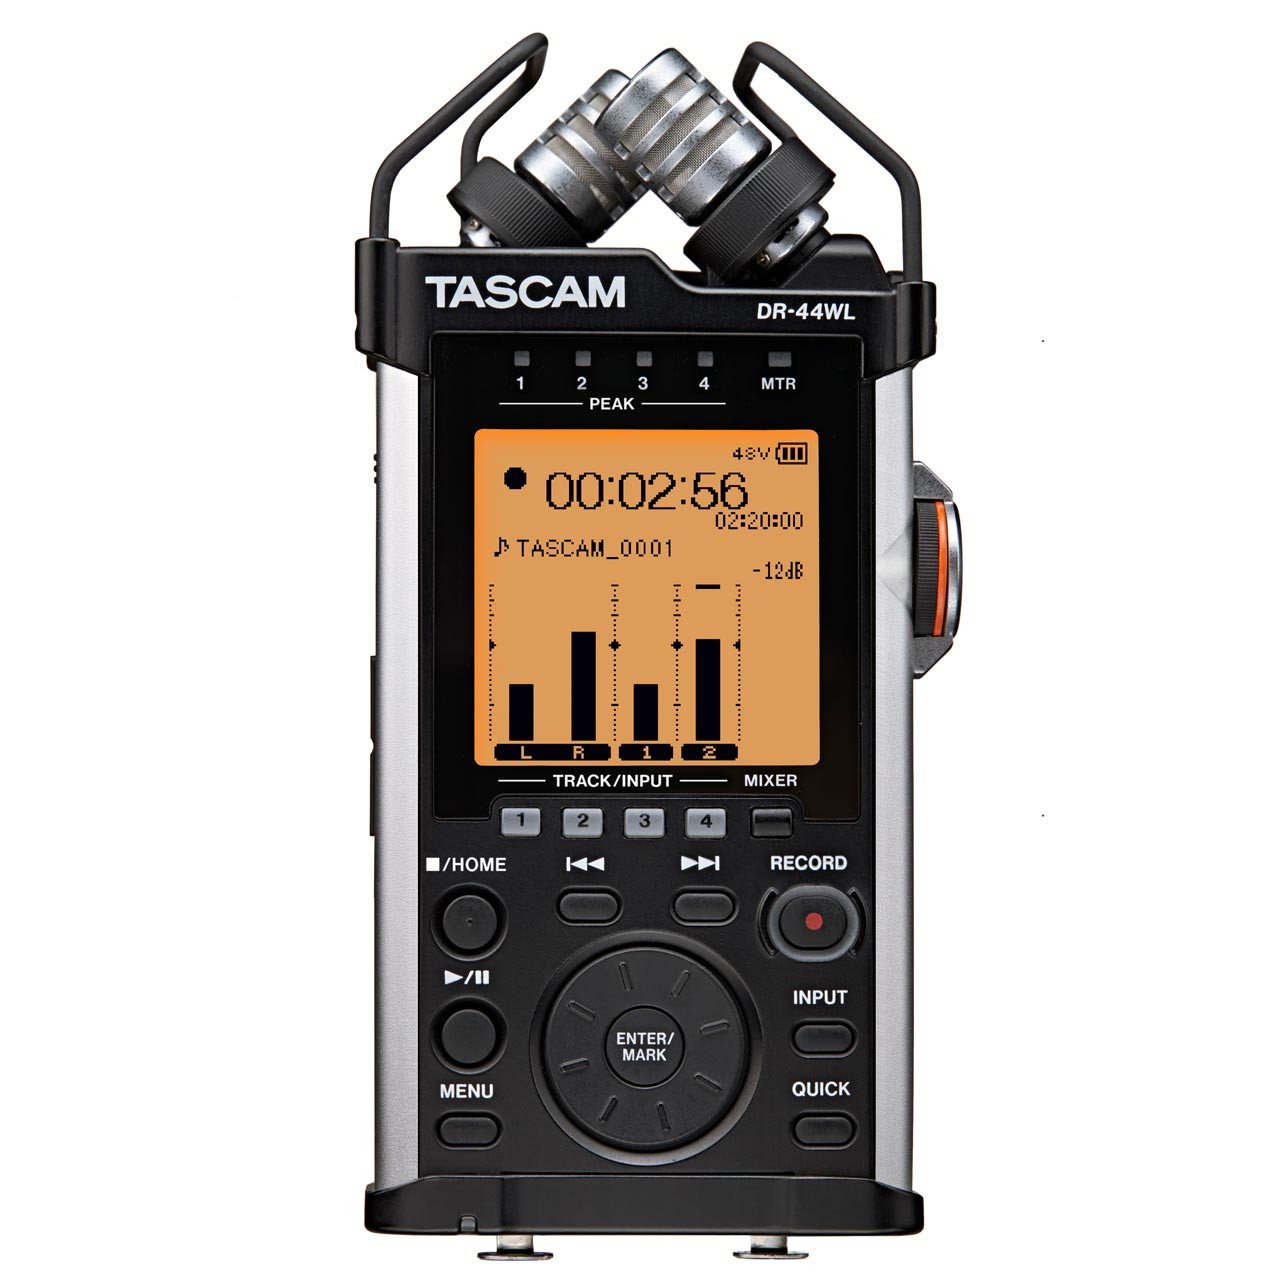 Portable Recorder - Tascam DR-44WL Handheld Digital Recorder With WIFI